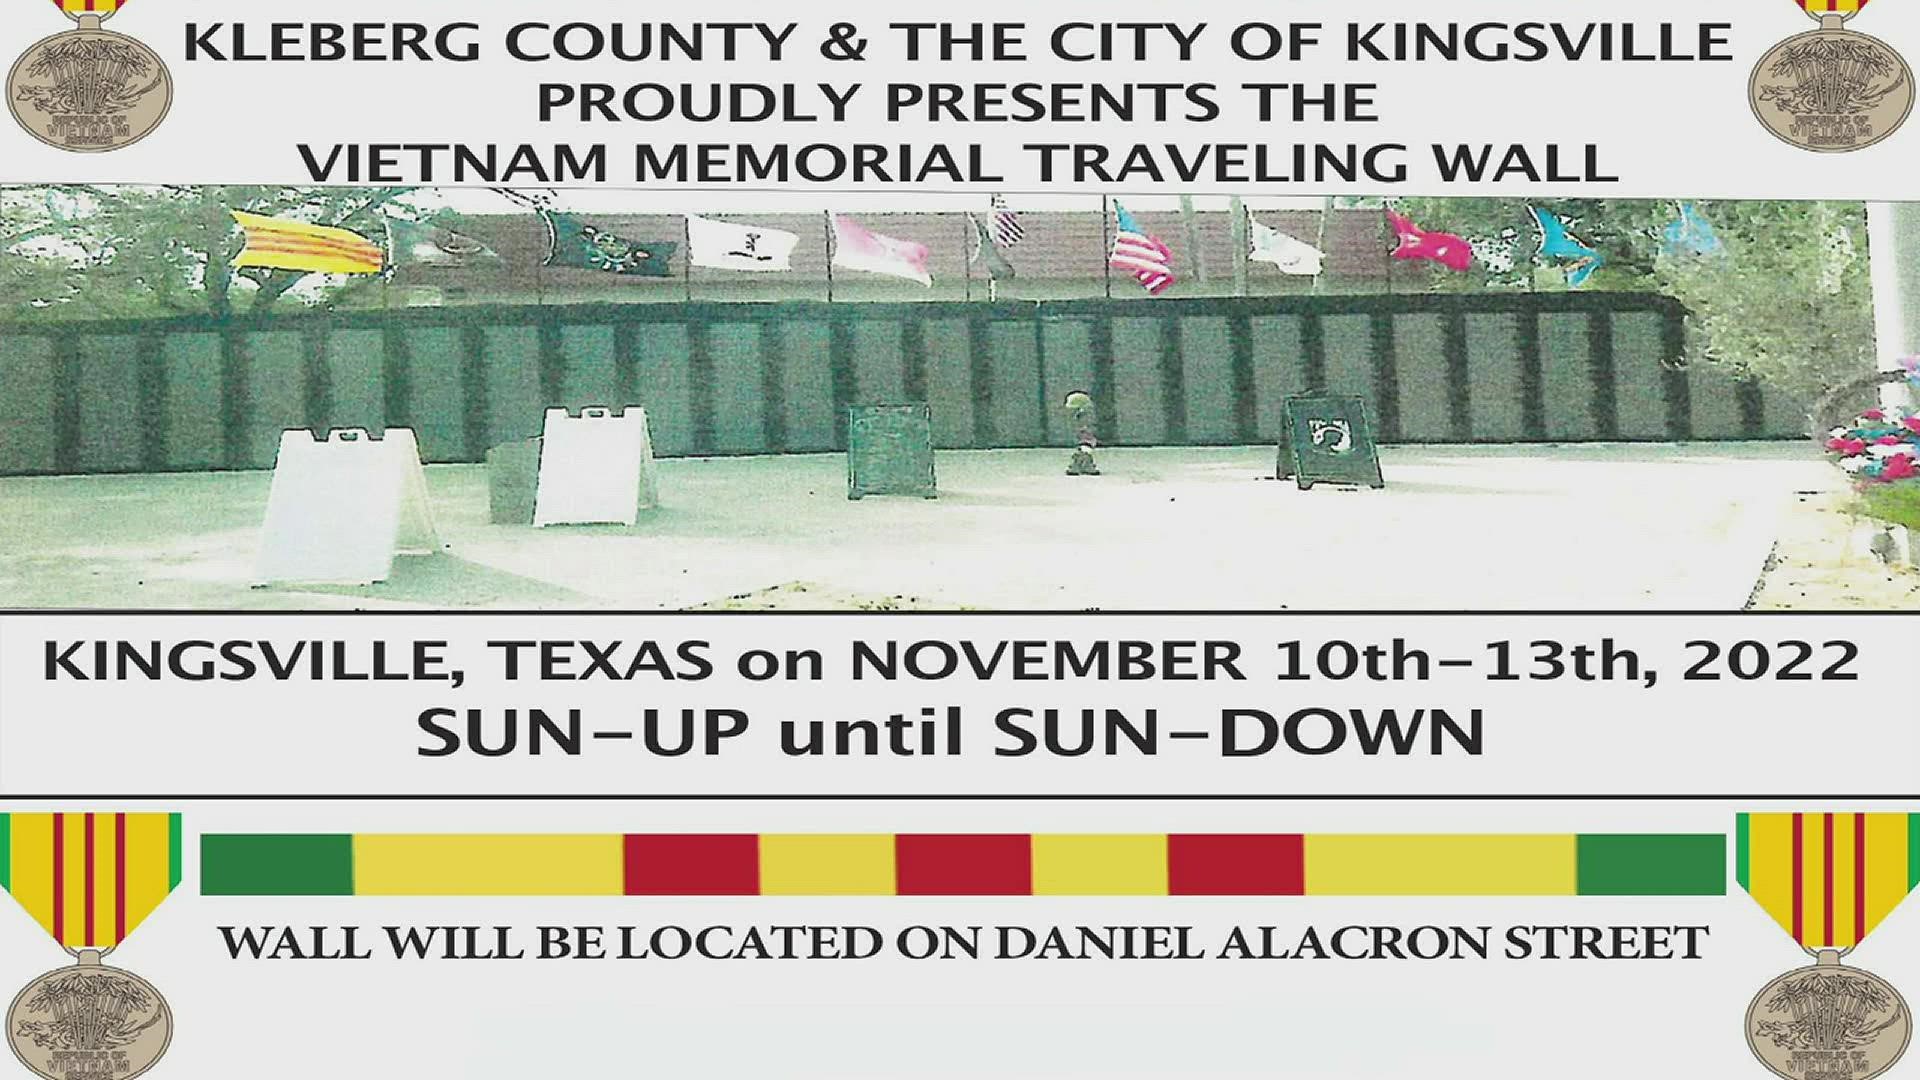 Kingsville Mayor Sam Fugate joined us live to discuss the significance of the Vietnam Memorial Traveling Wall and when viewers can pay their respects.